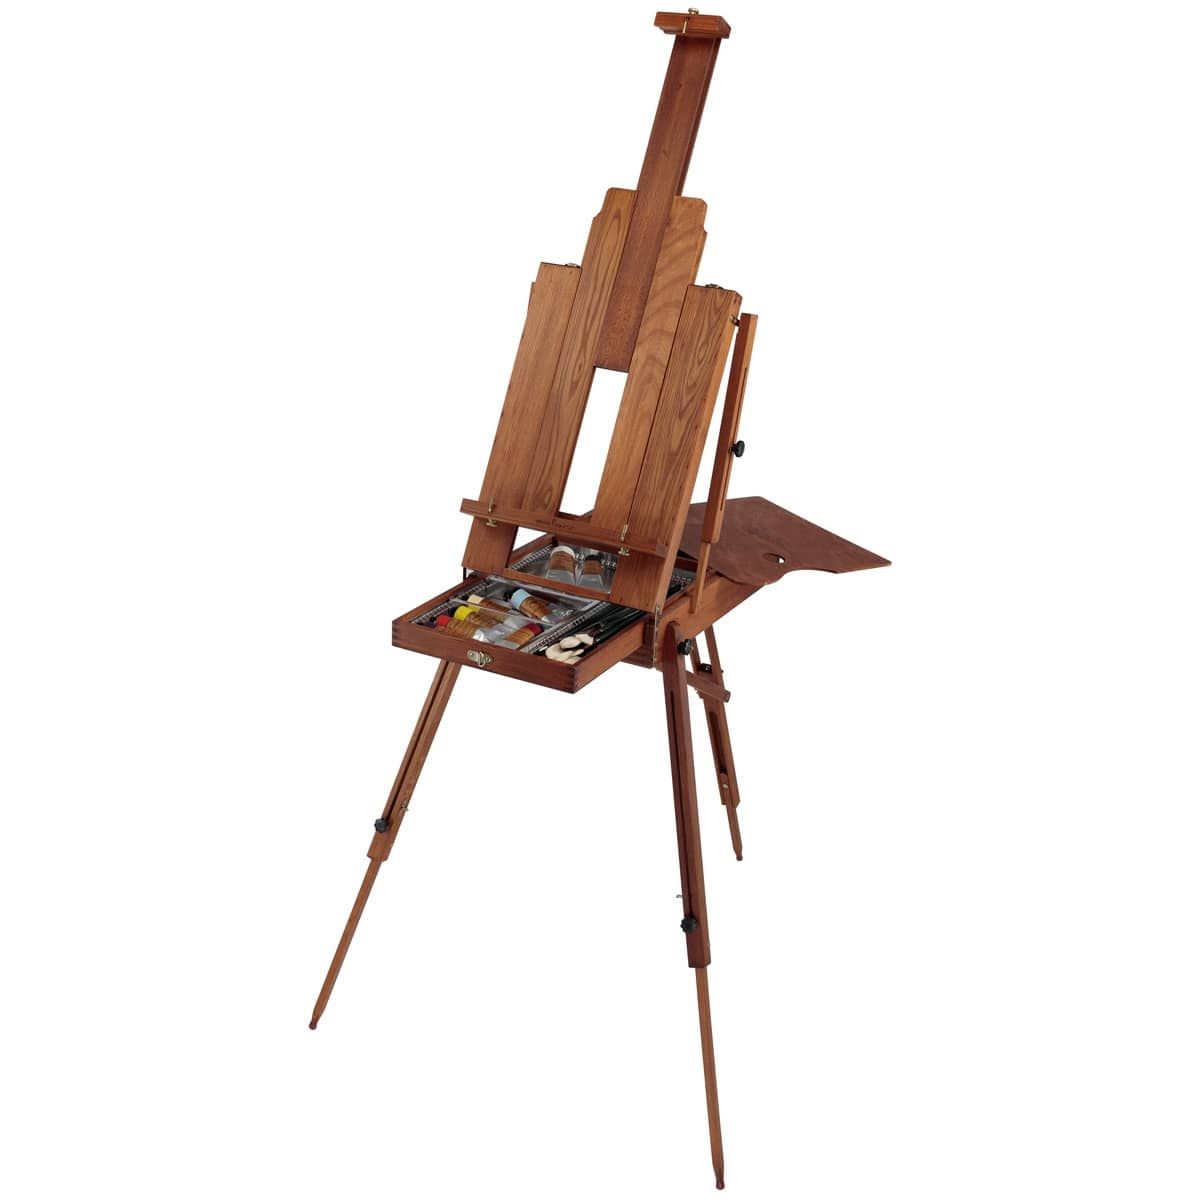 Holds paper, board or canvas up to 39.5" high